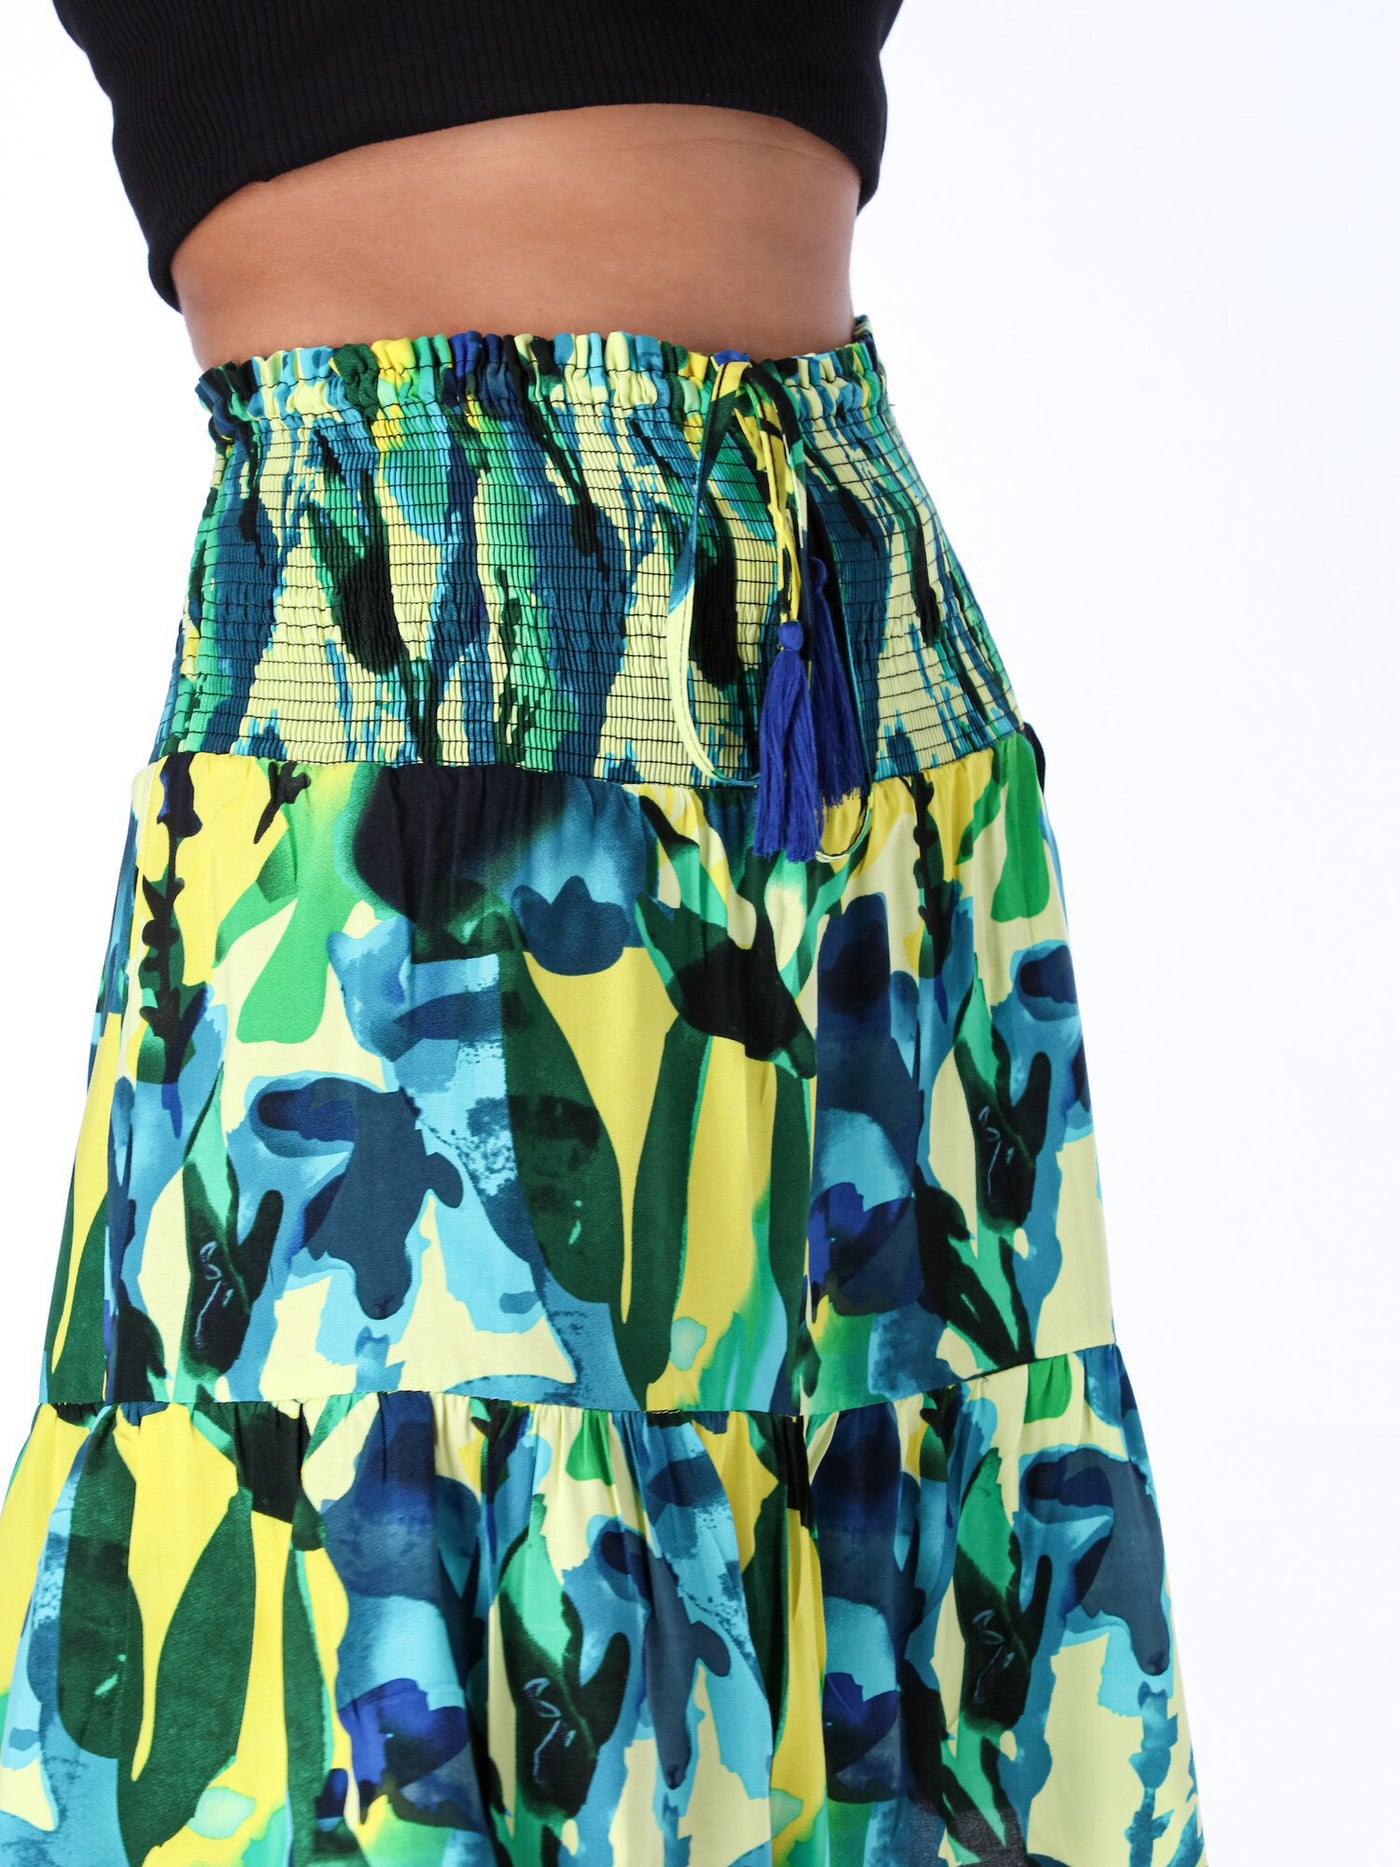 OR Women's All-Over Print Gypsy Skirt